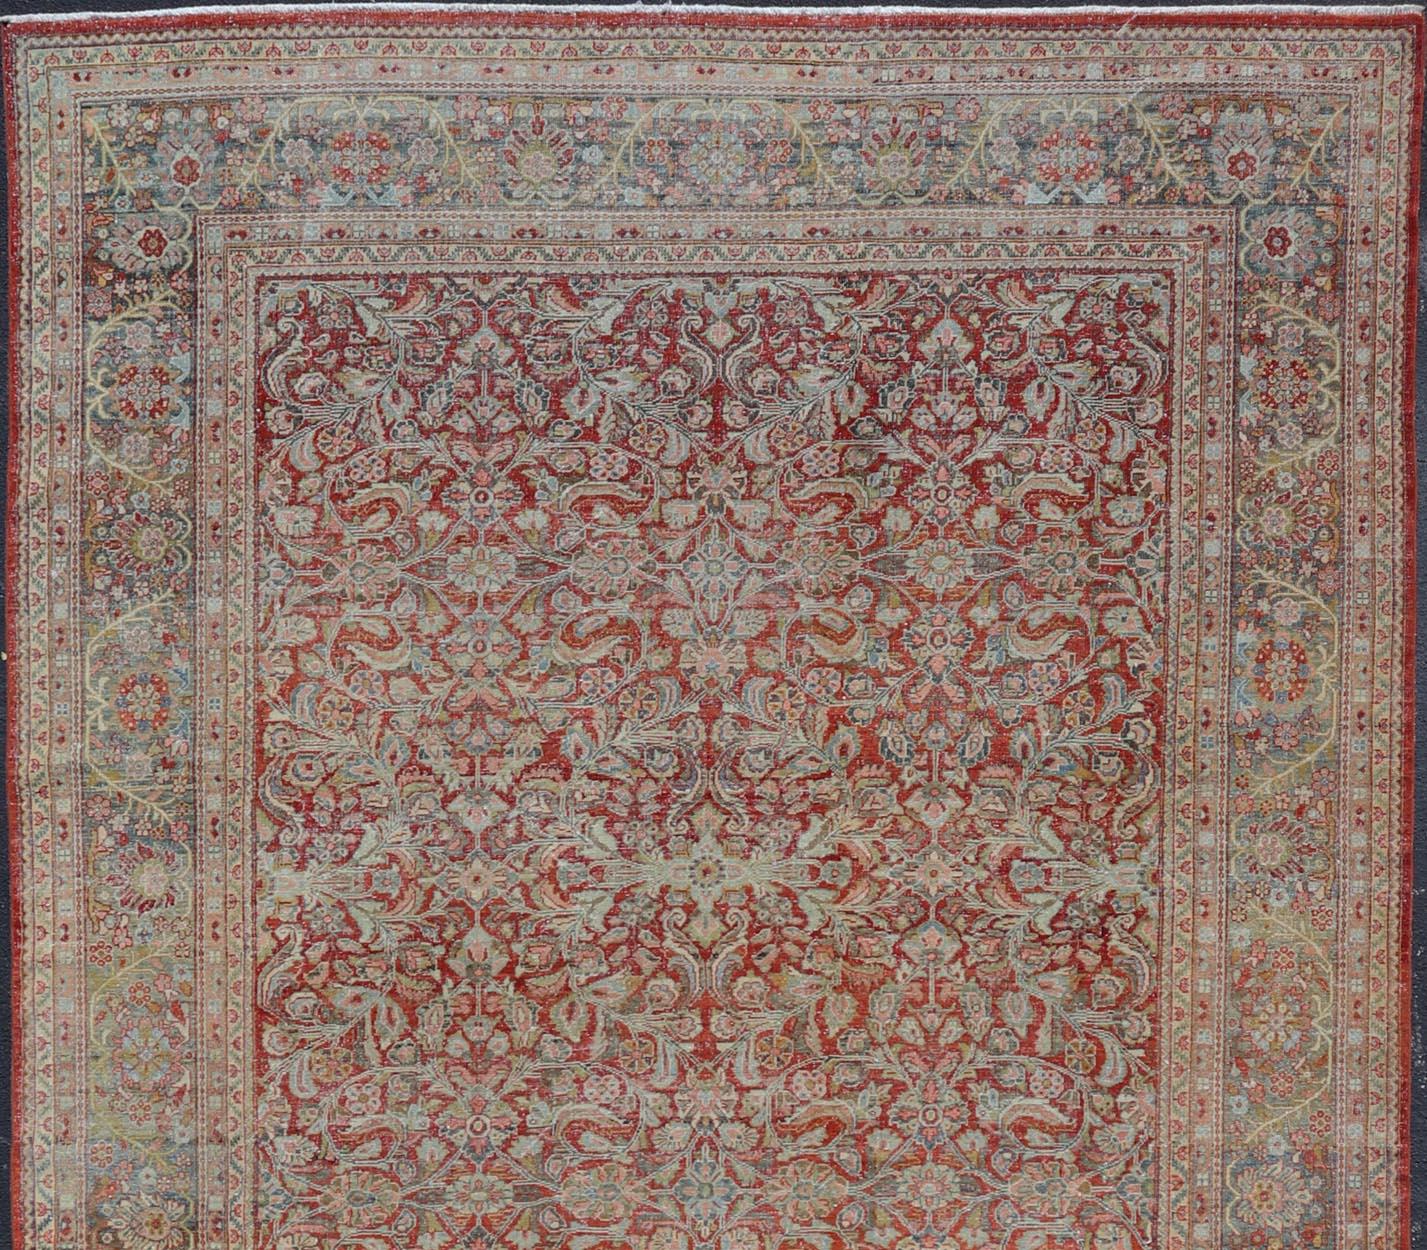 Antique Large Persian Colorful Sultanabad Mahal Rug with All Over Floral Design For Sale 9